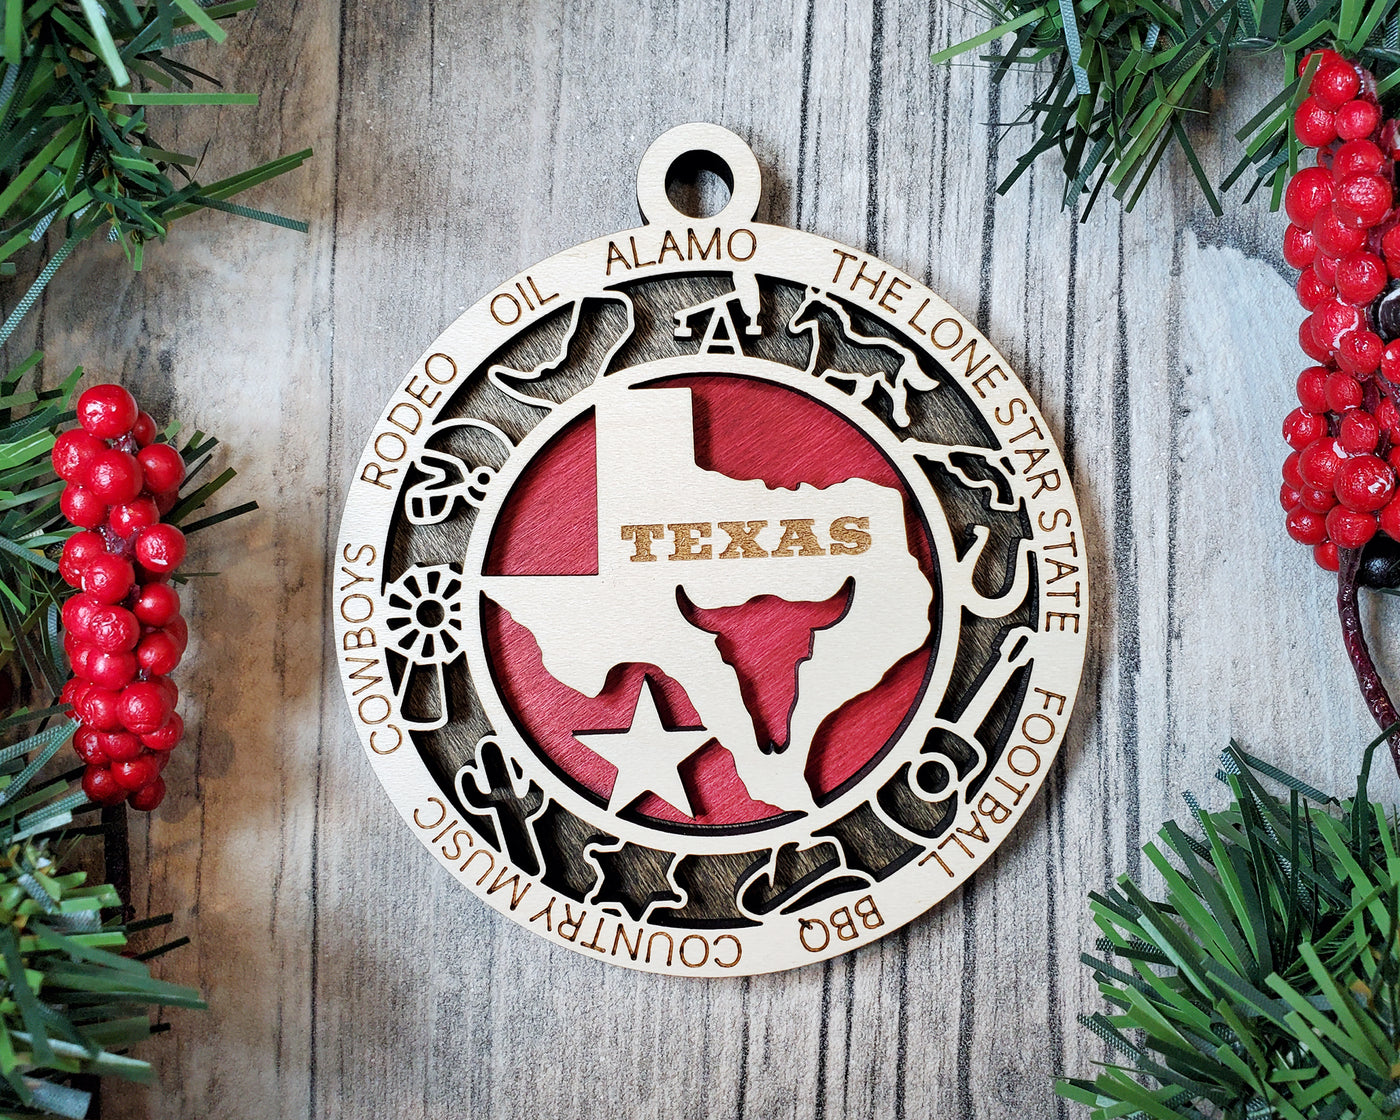 State Ornaments - Texas